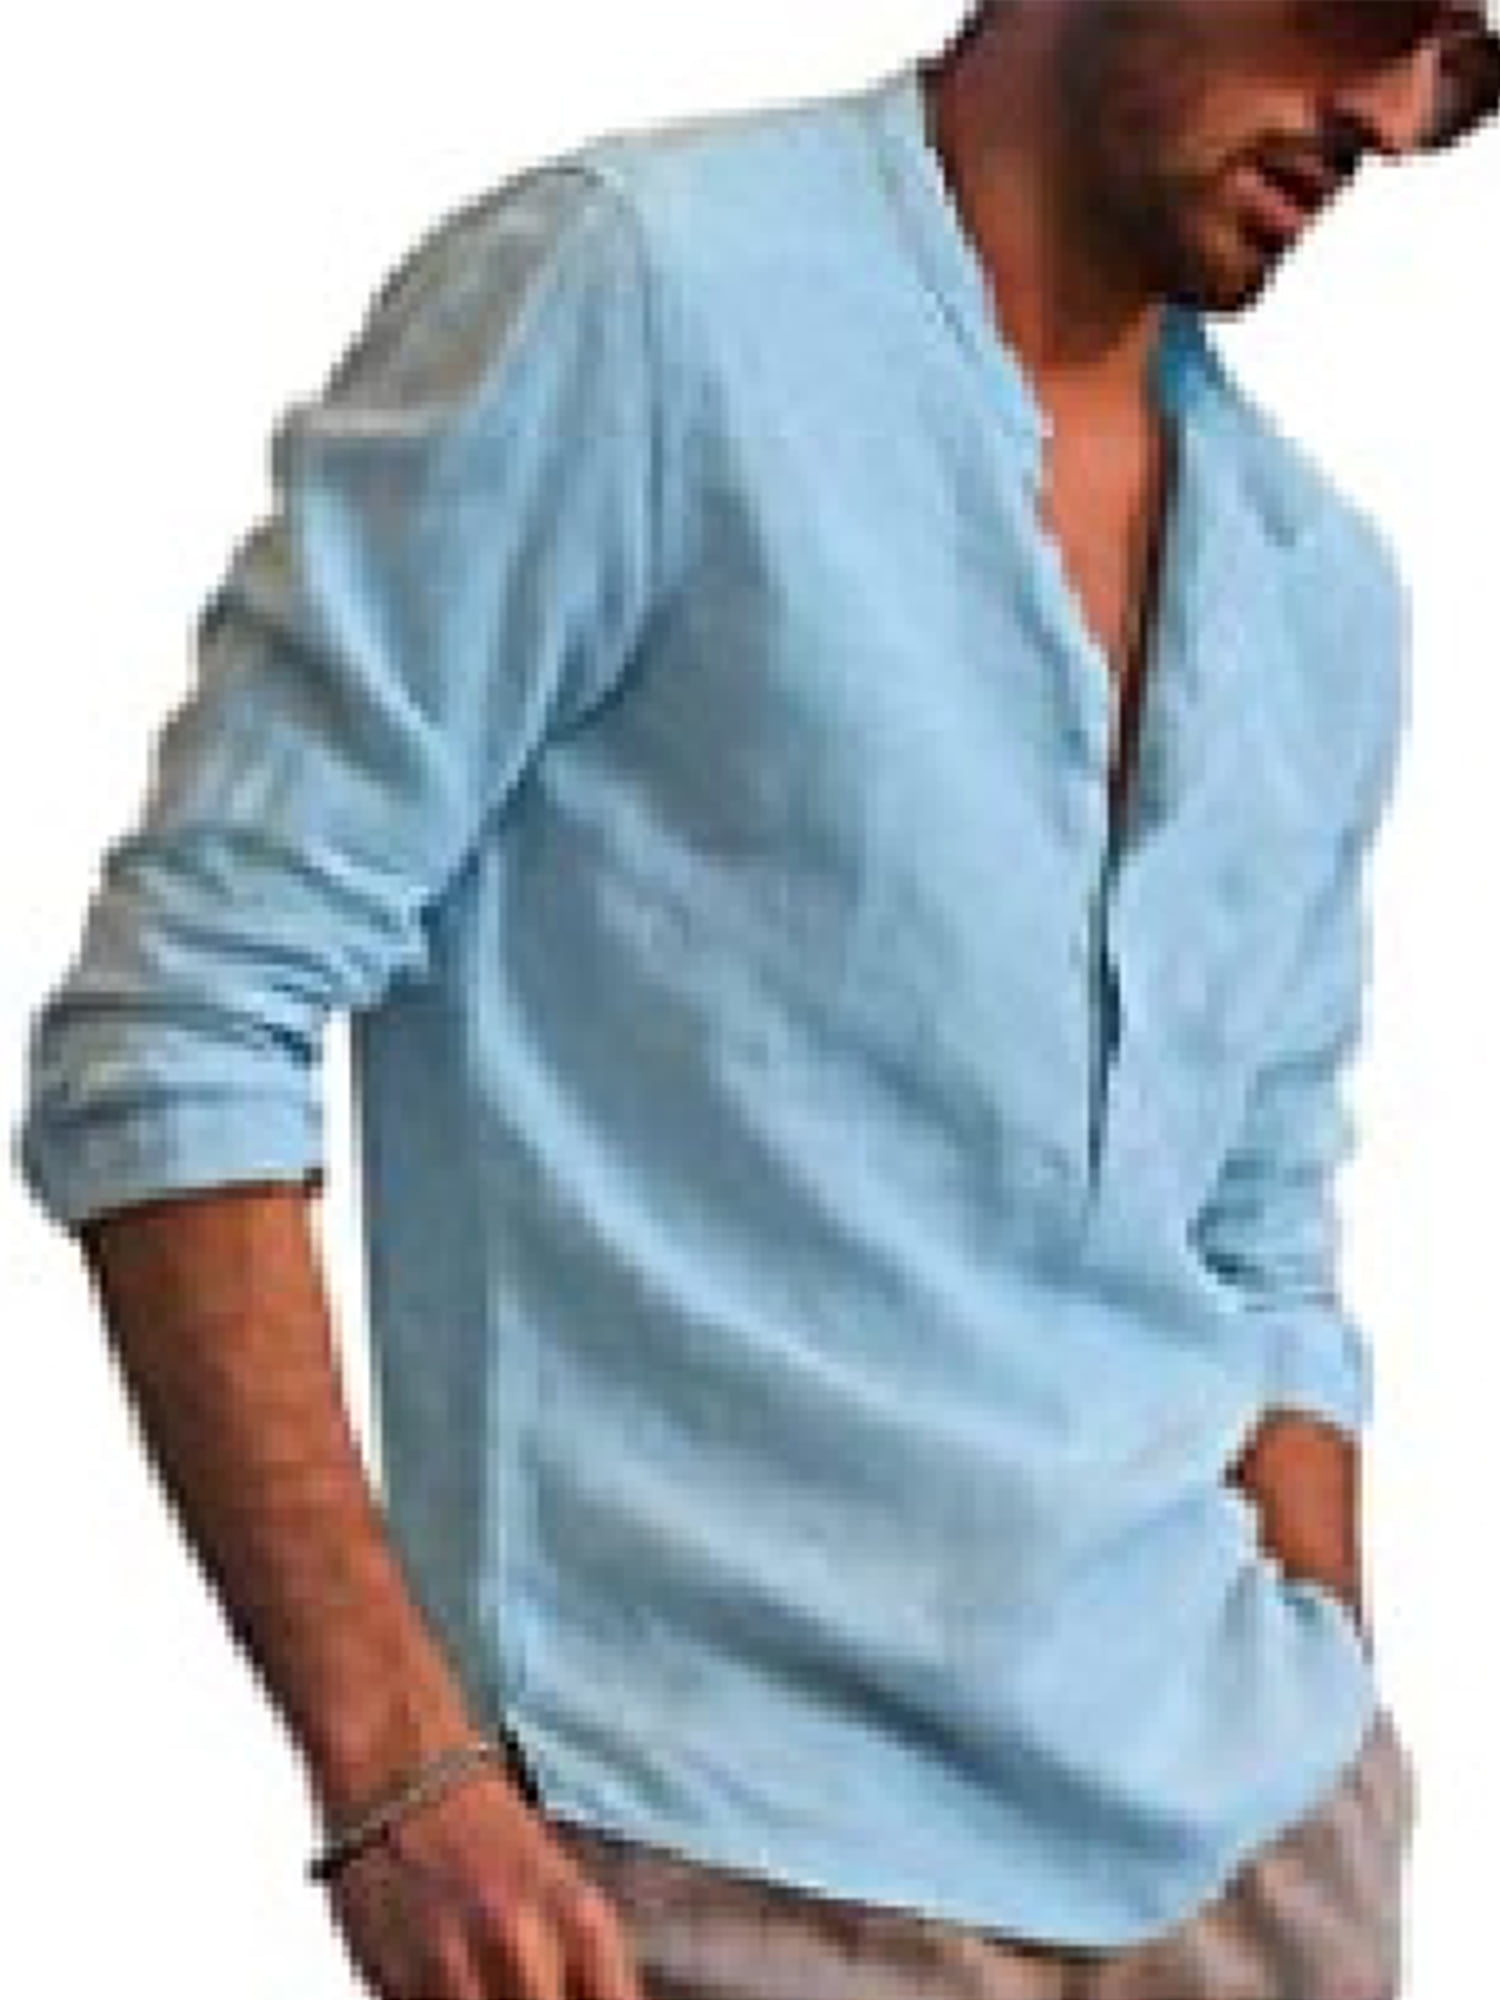 Mens Casual Long Sleeve Linen Henley T-Shirt Loose Fit Solid Beach Yoga Top